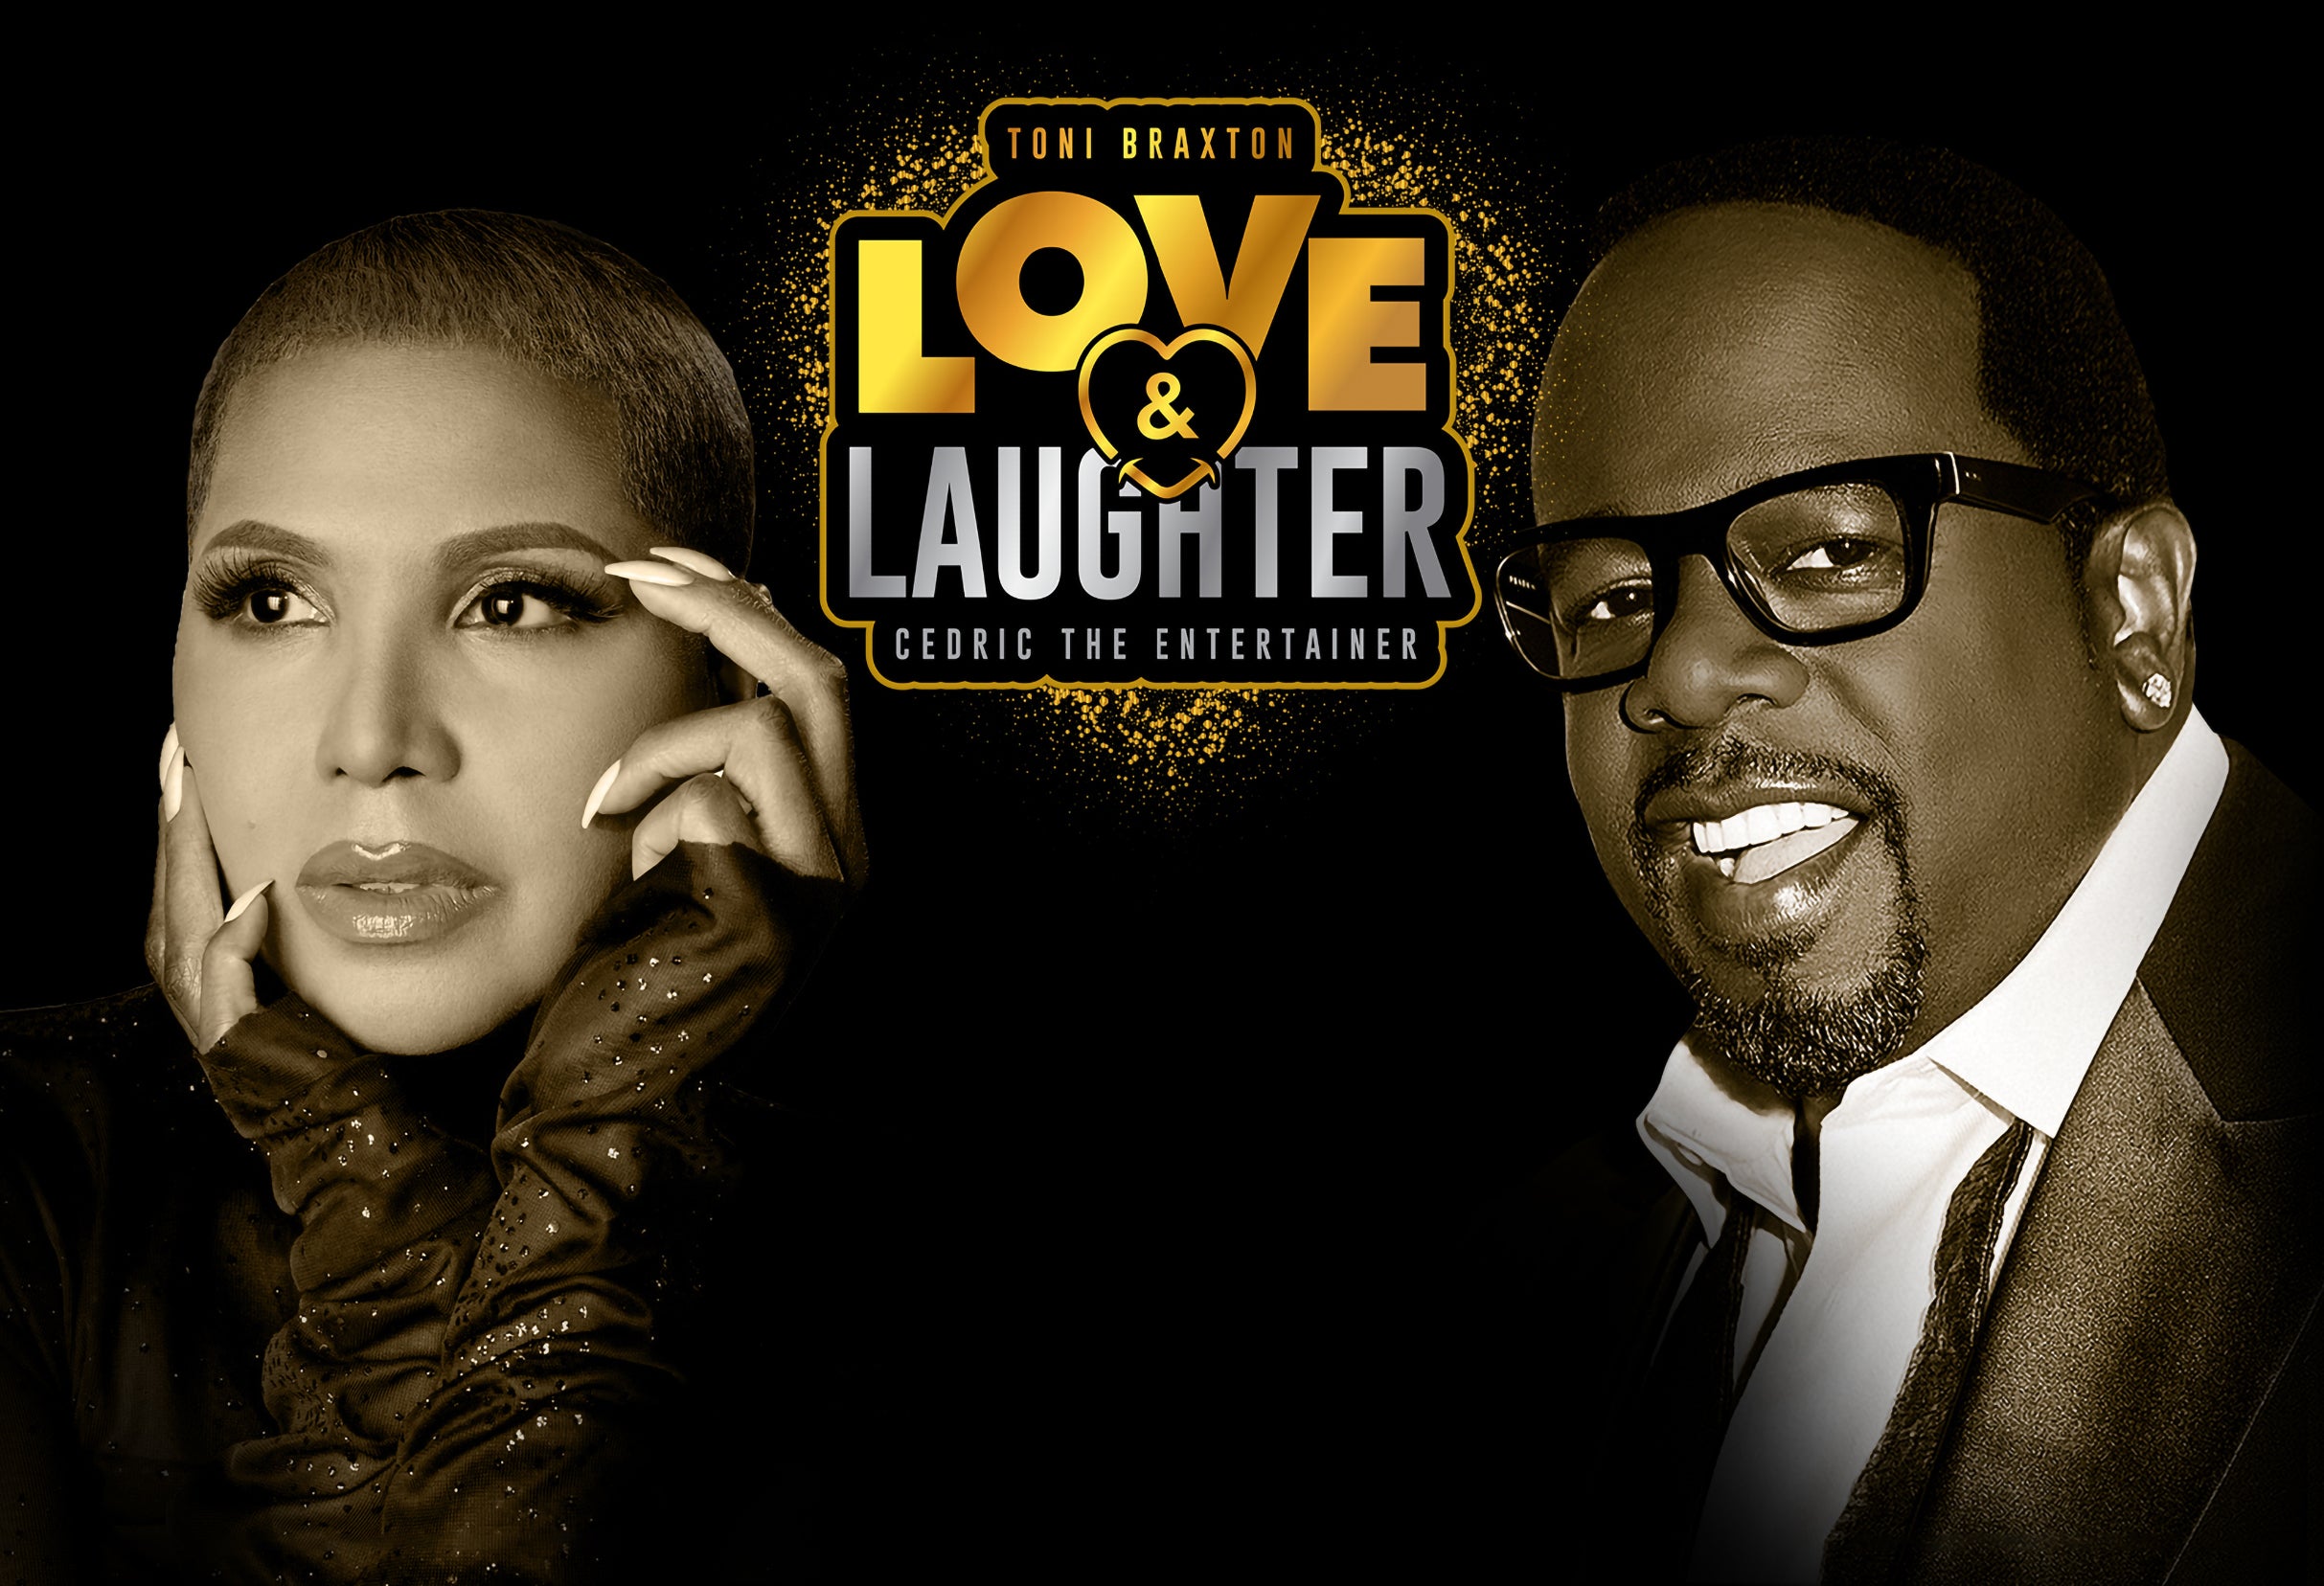 Love & Laughter: Toni Braxton & Cedric The Entertainer in Las Vegas promo photo for Official Platinum presale offer code